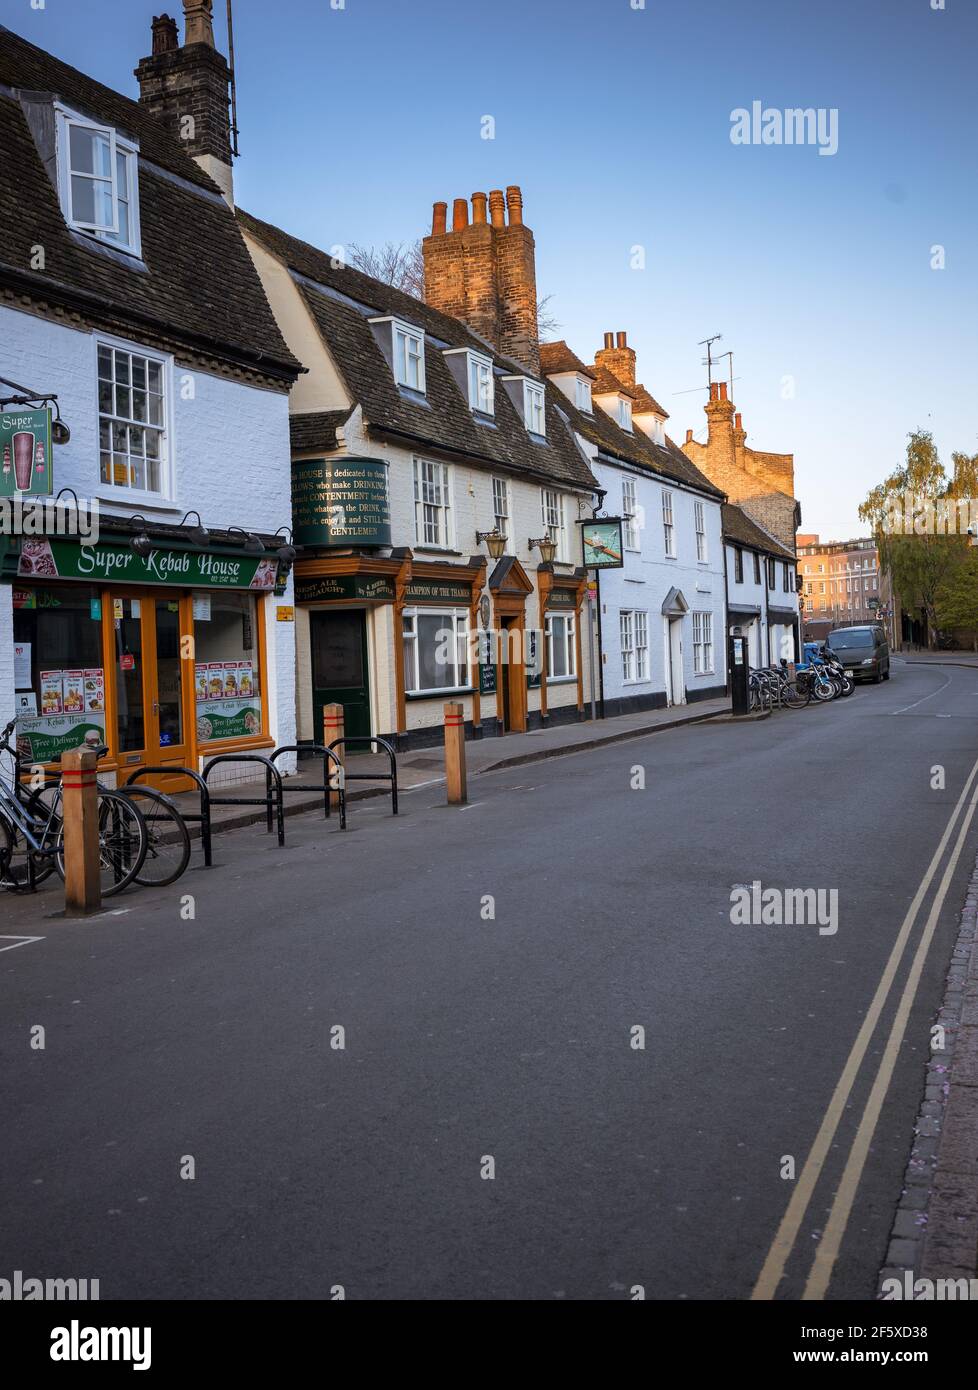 Old buildings and public house in Kings Road Cambridge England Stock Photo